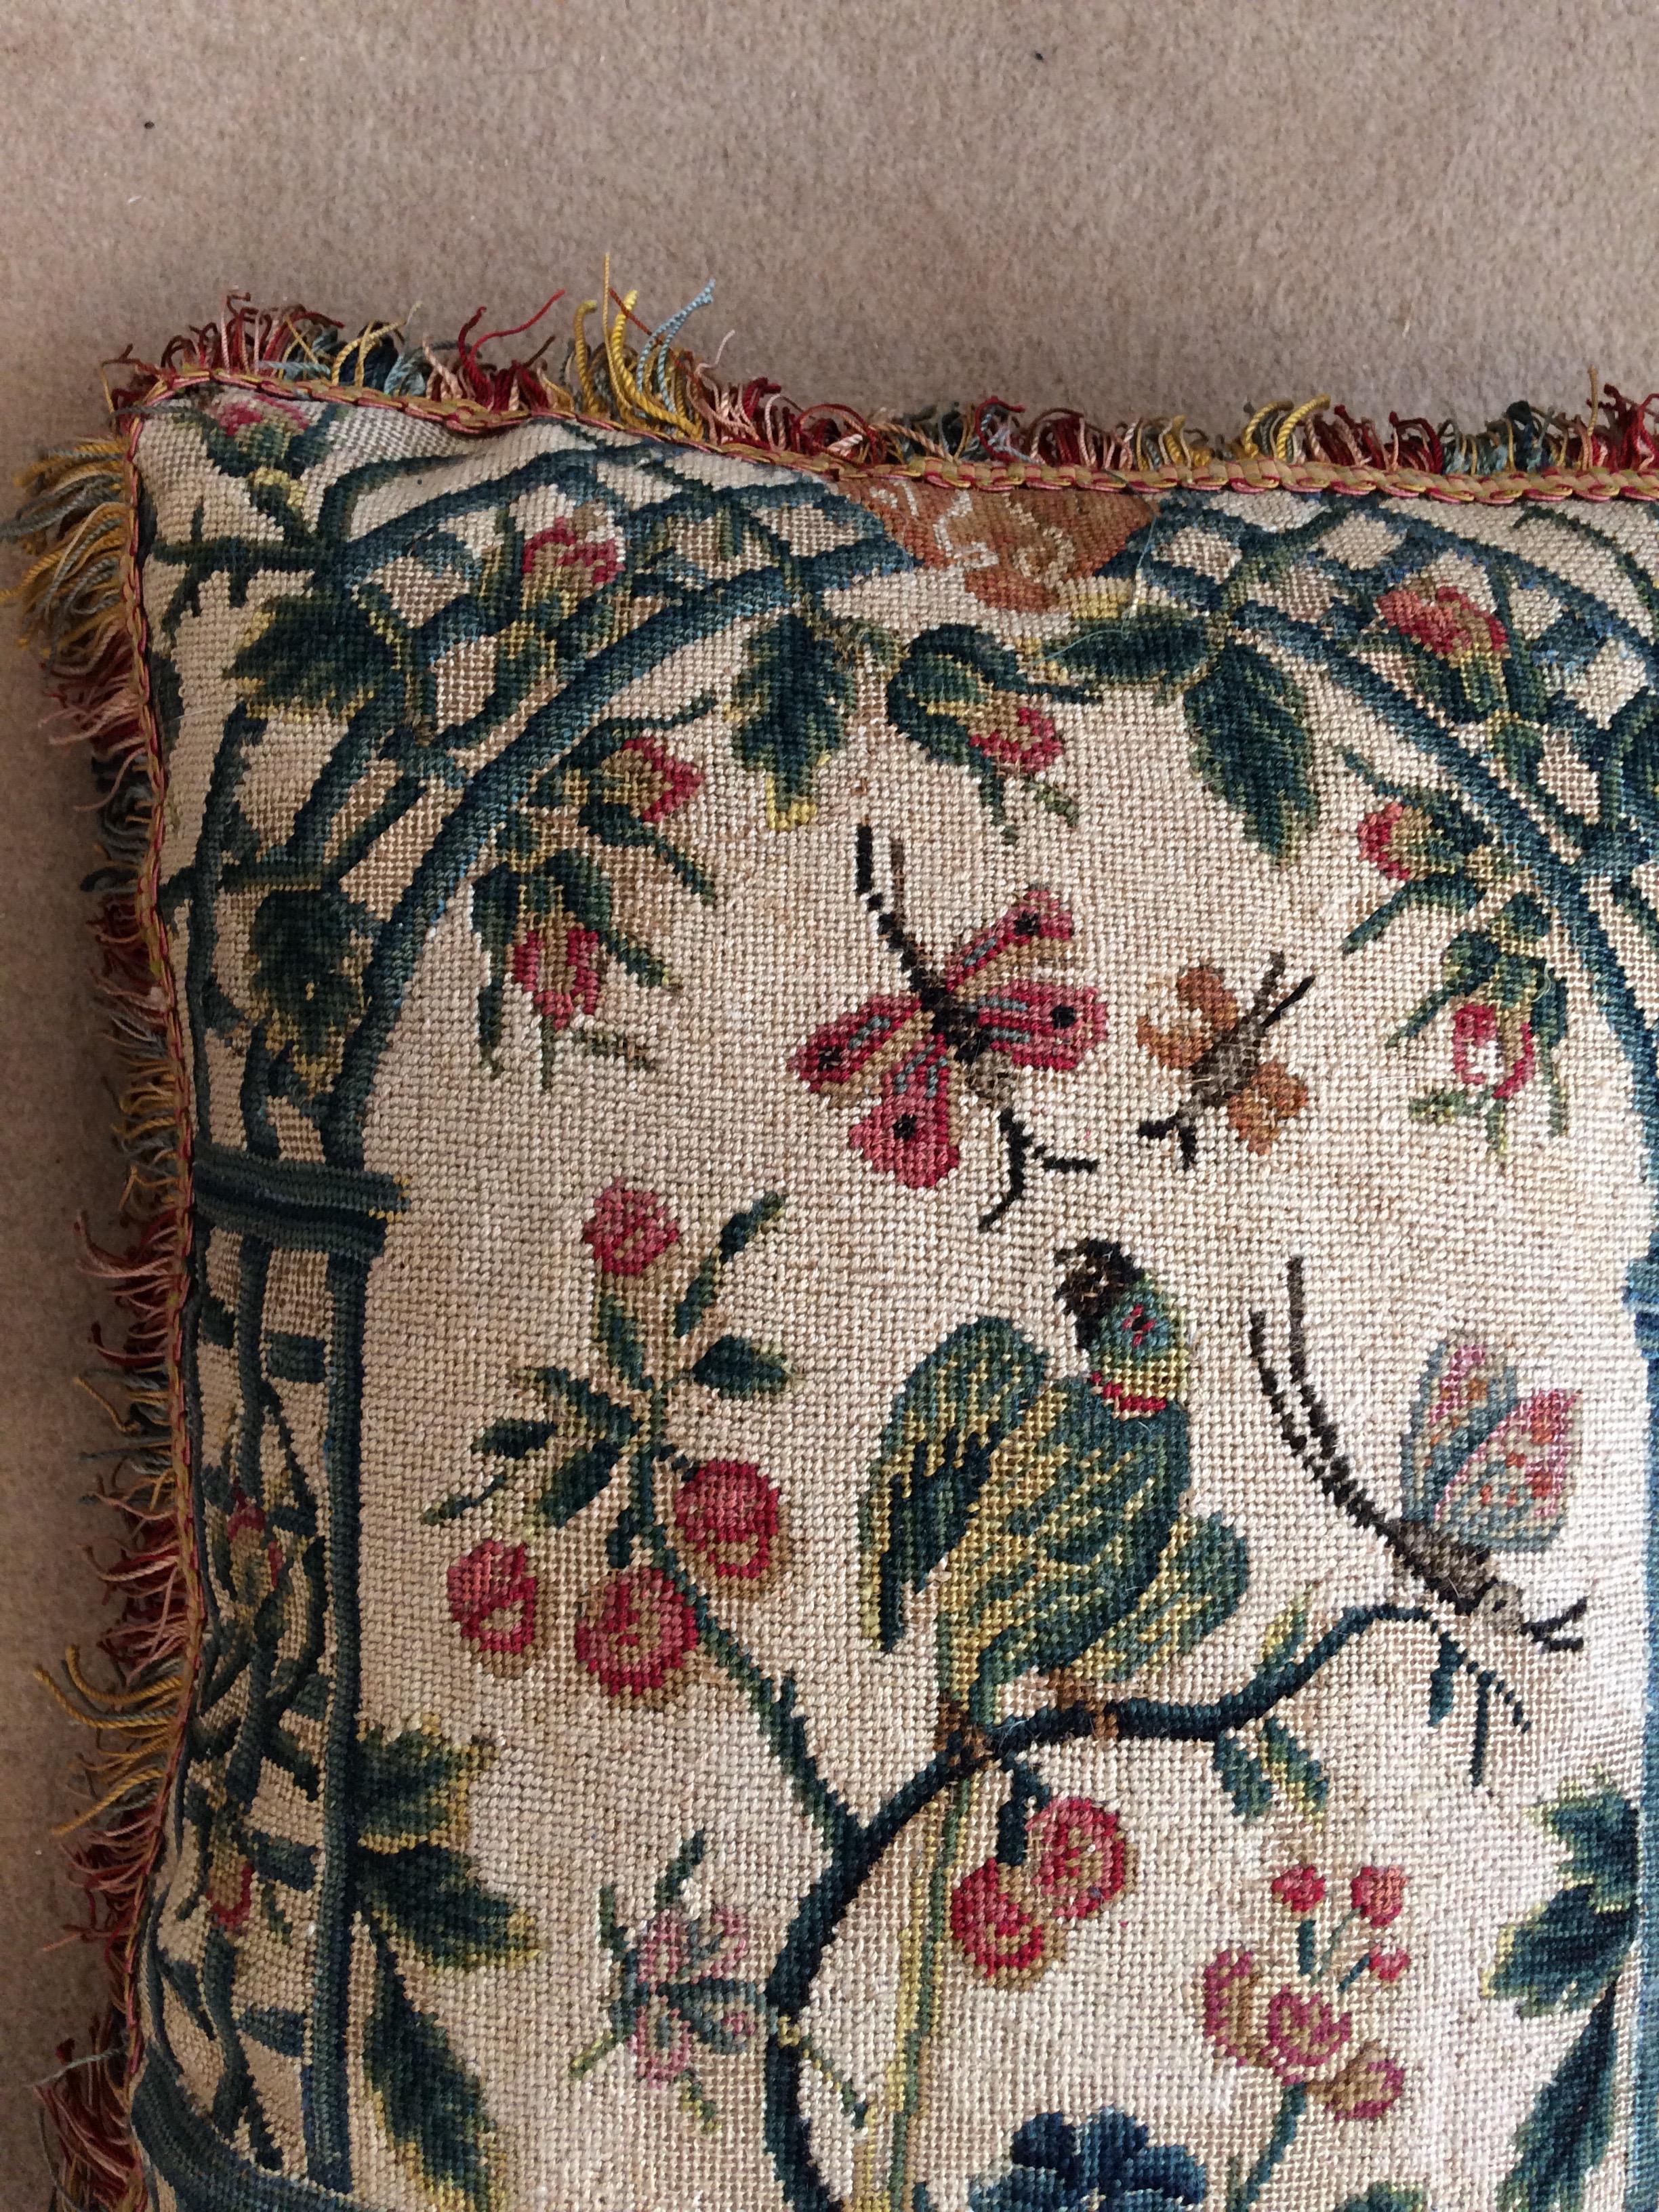 A cushion of late 18th century French needlework with a green parakeet on a white background with a trellis in the background.